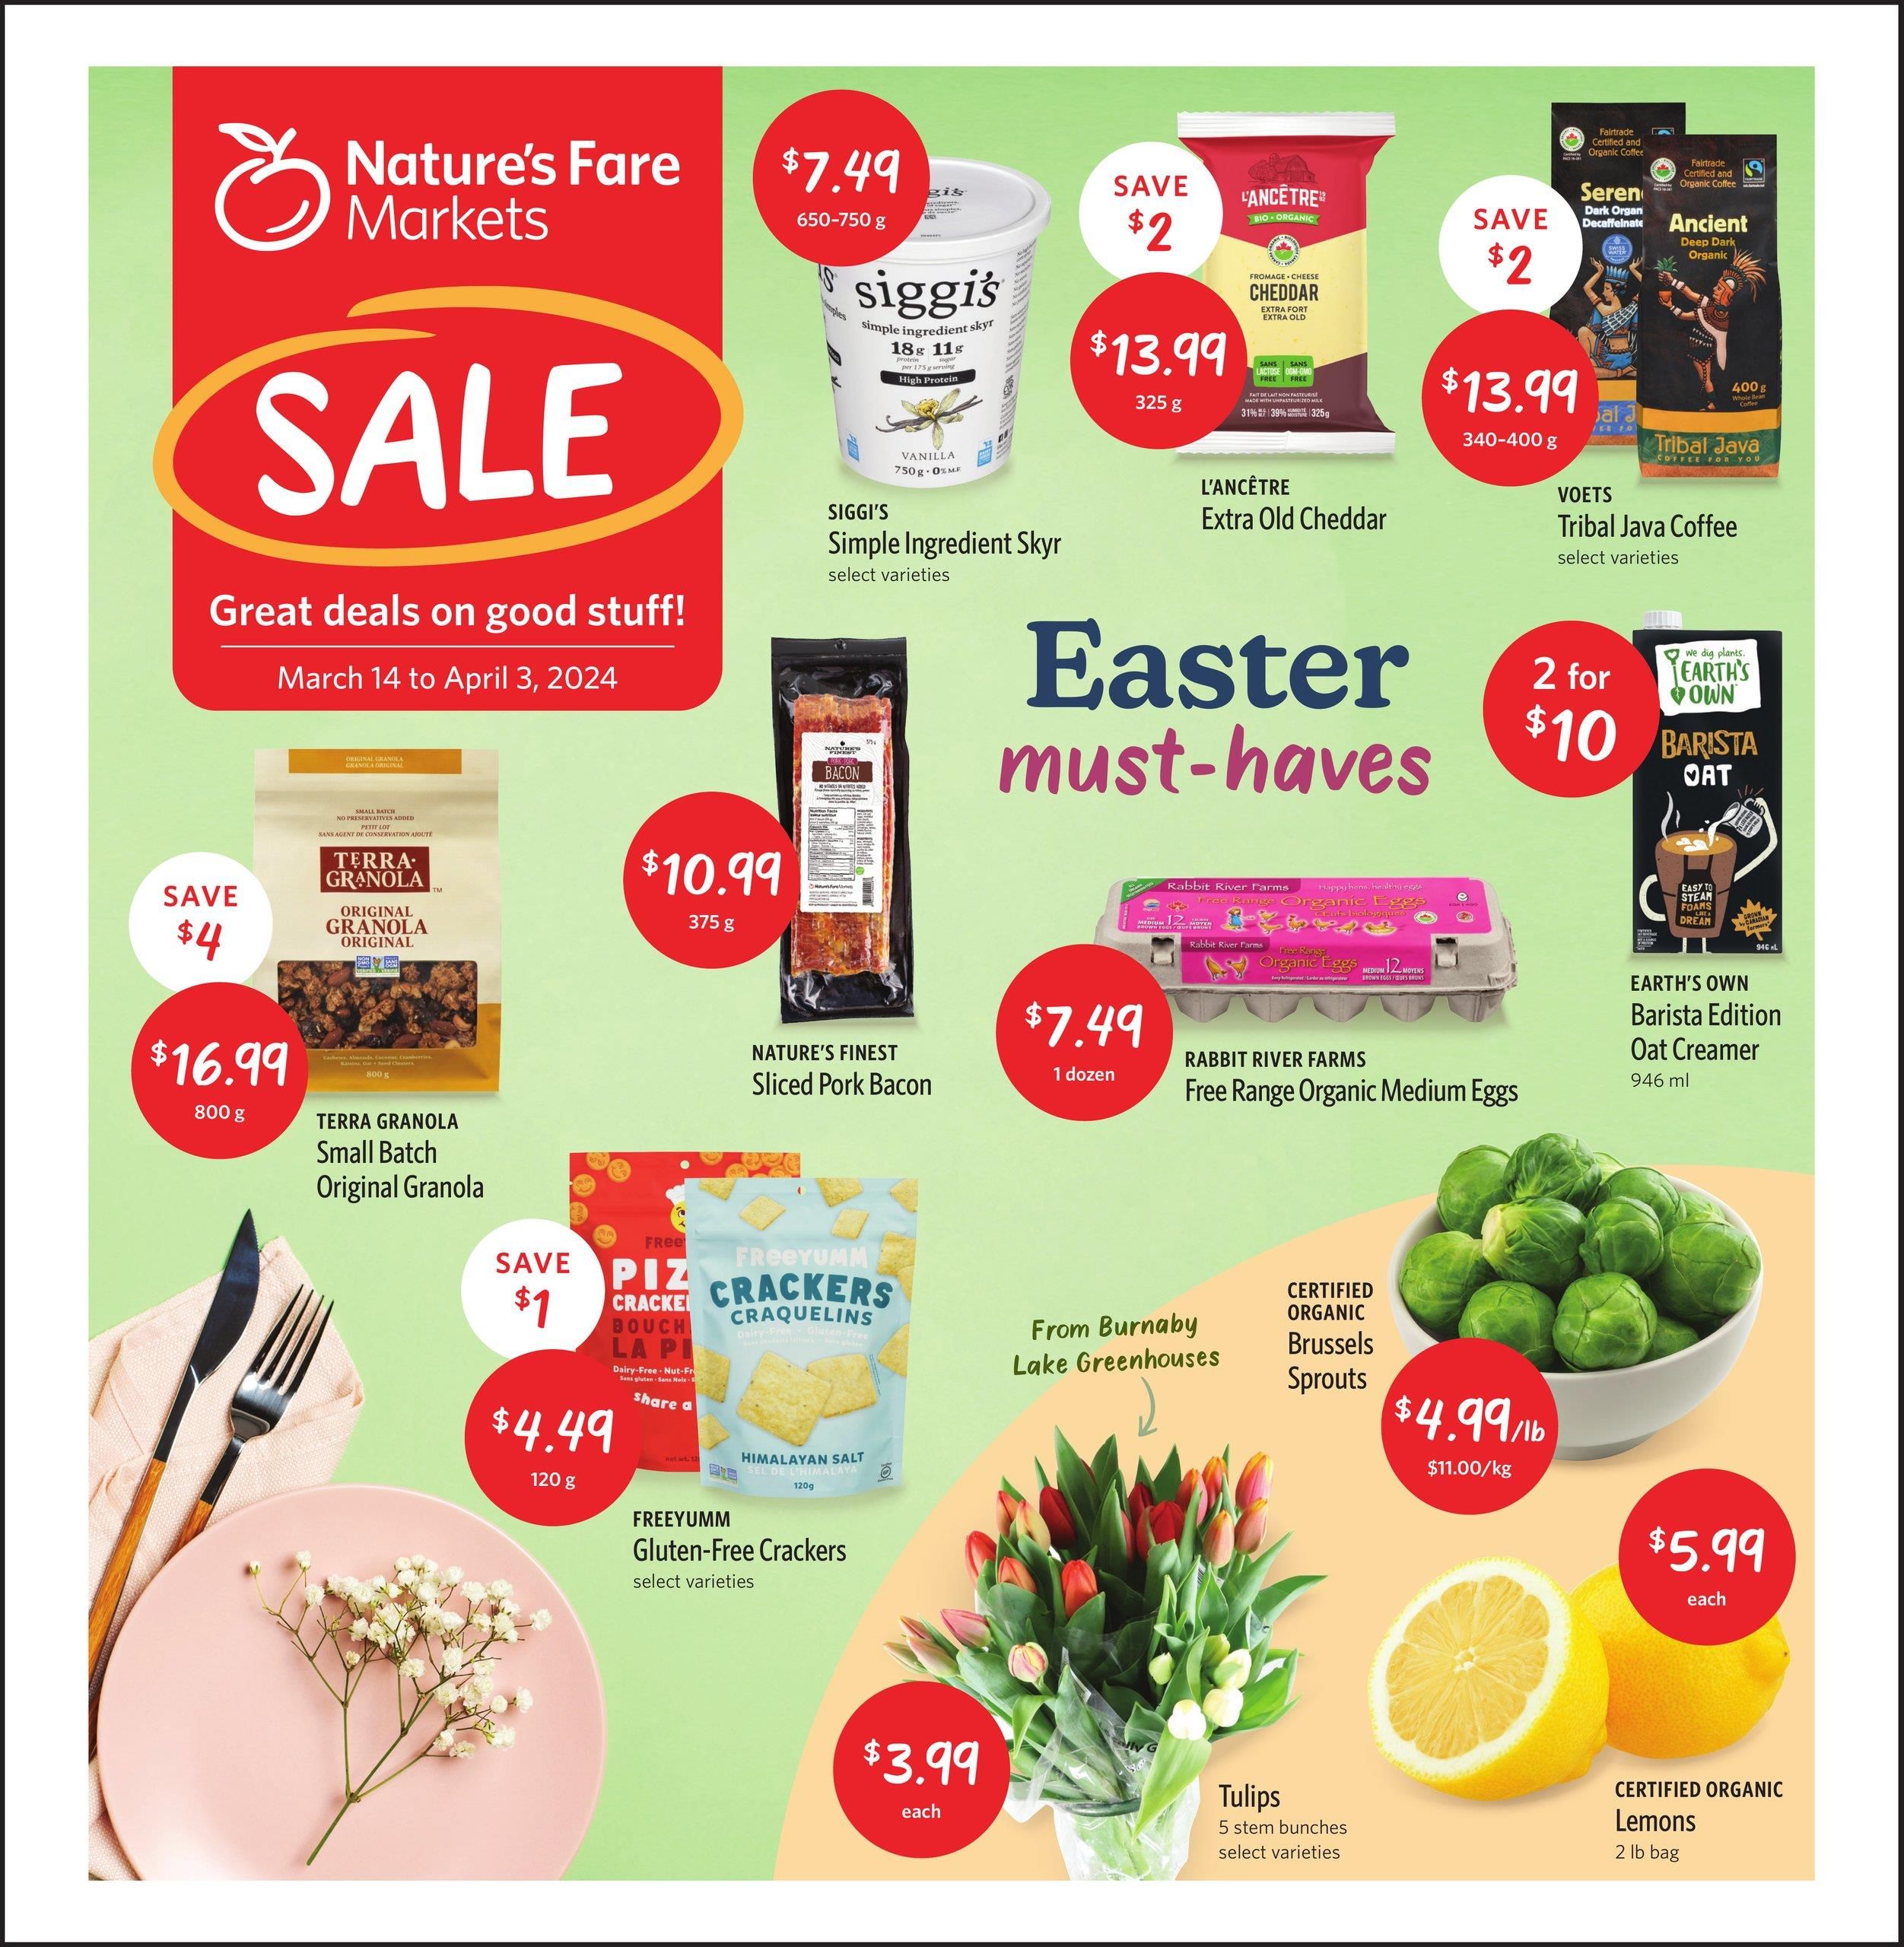 Nature's Fare Markets - 3 Weeks of Savings